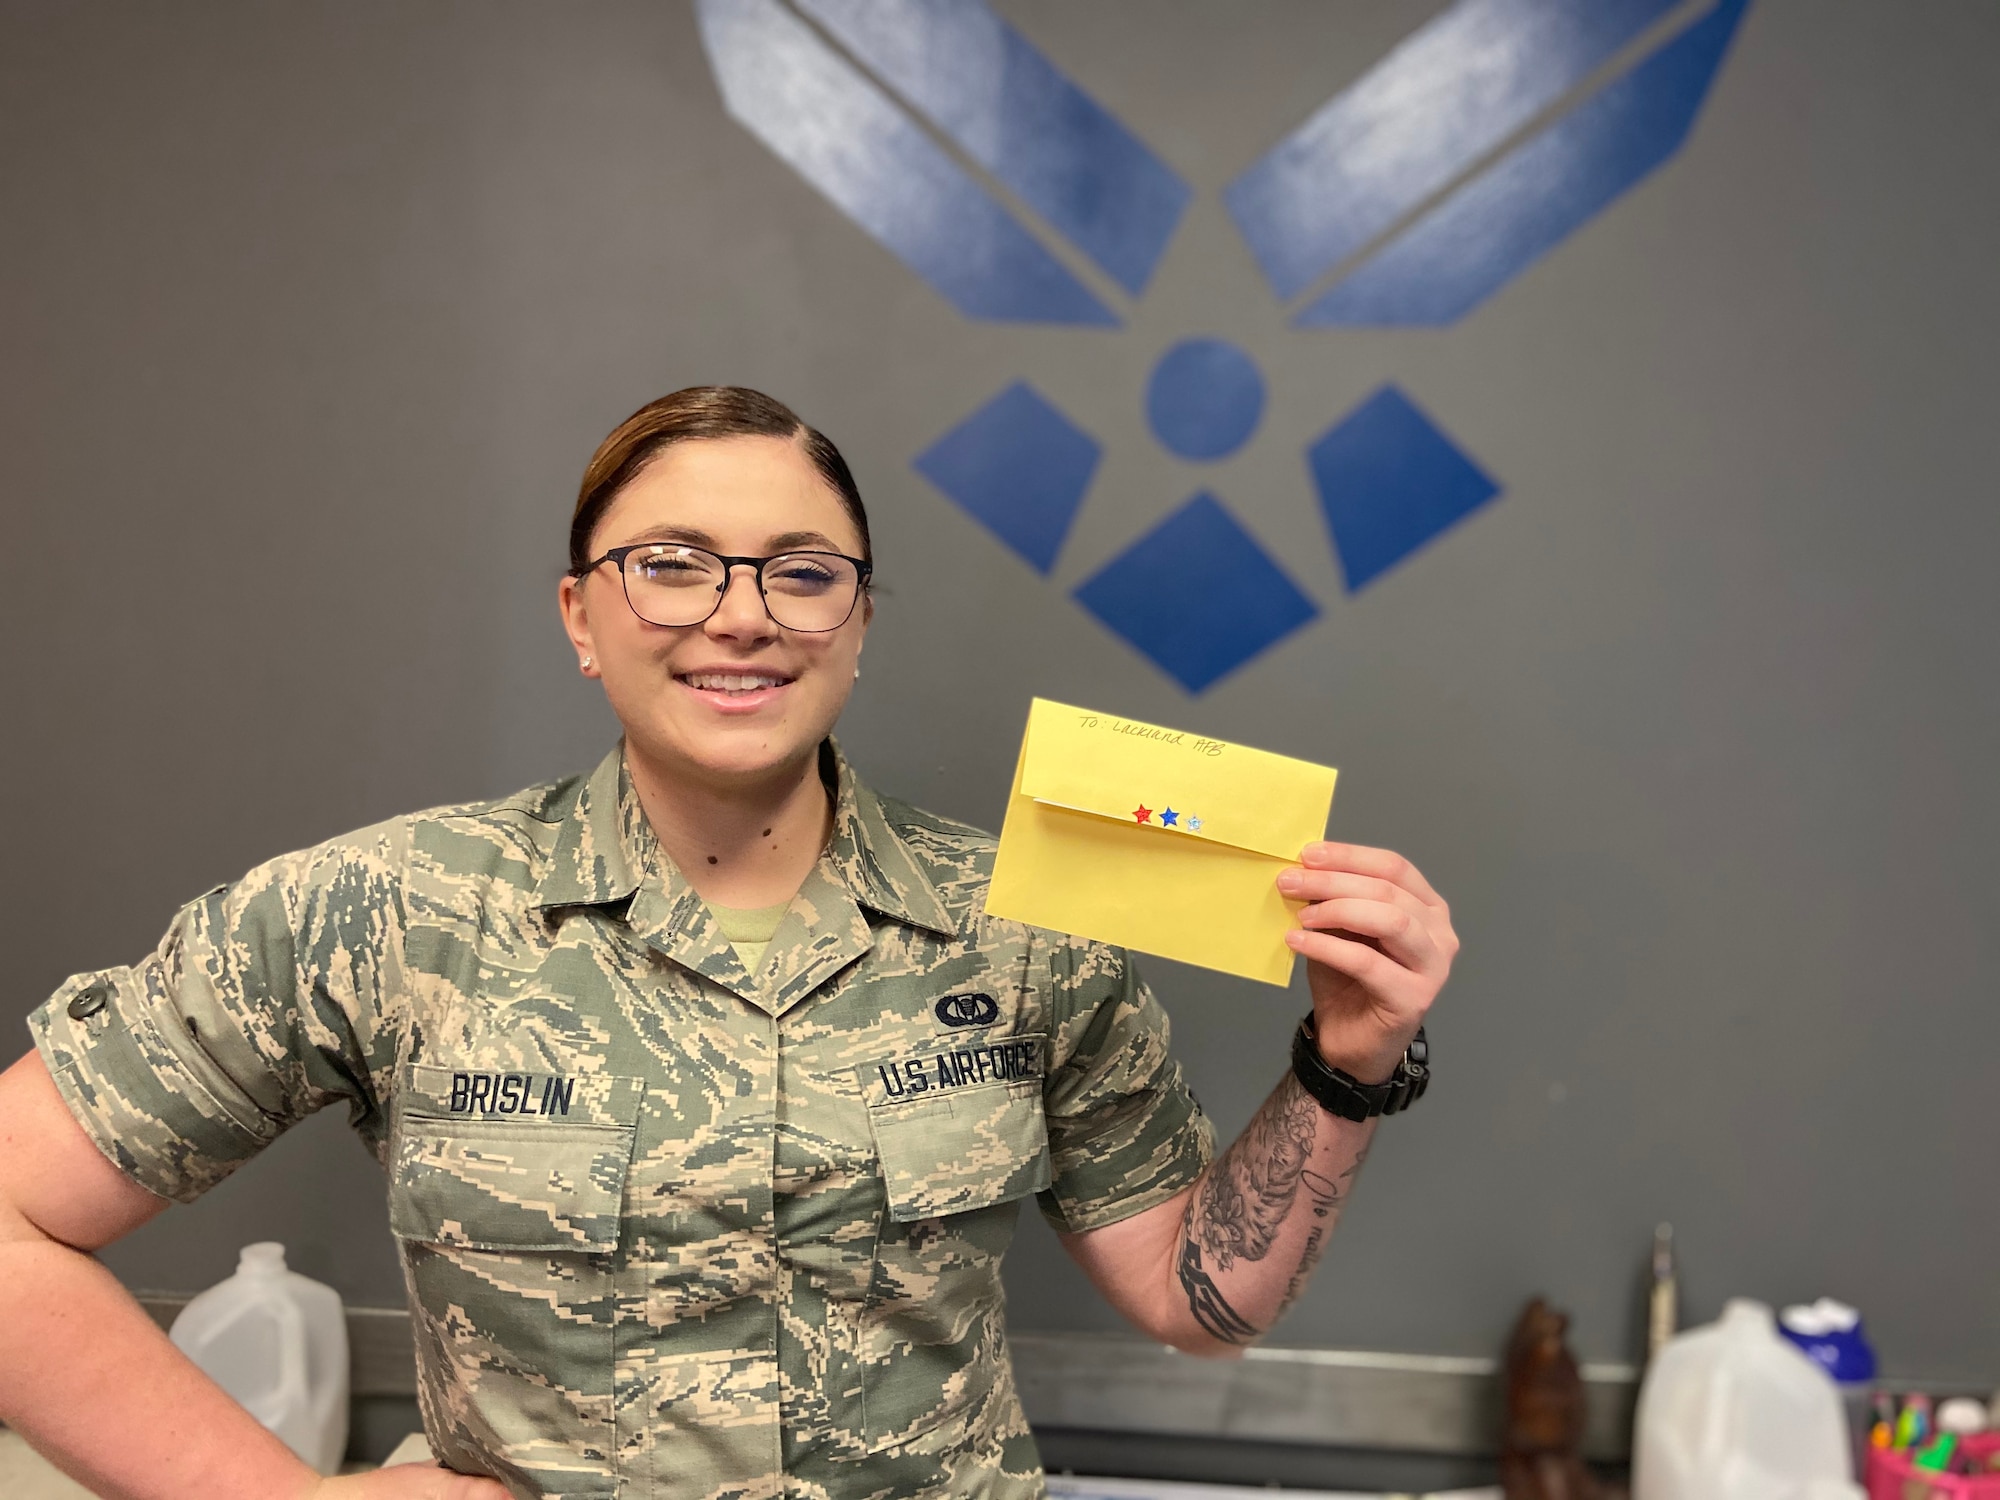 Airman 1st Class Cailey Brislin, 434th Squadron Aviation Resource Management (SARM) at Laughlin Air Force Base, Texas, began the project Letters to Lackland just shy of one year after graduating basic military training herself. Brislin was inspired to write letters to current trainees after finding old letters of support she saved from her time at Lackland, which helped motivate her during the most rigorous parts of training. (U.S. Air Force photo by 2nd Lt. Rachael Parks)